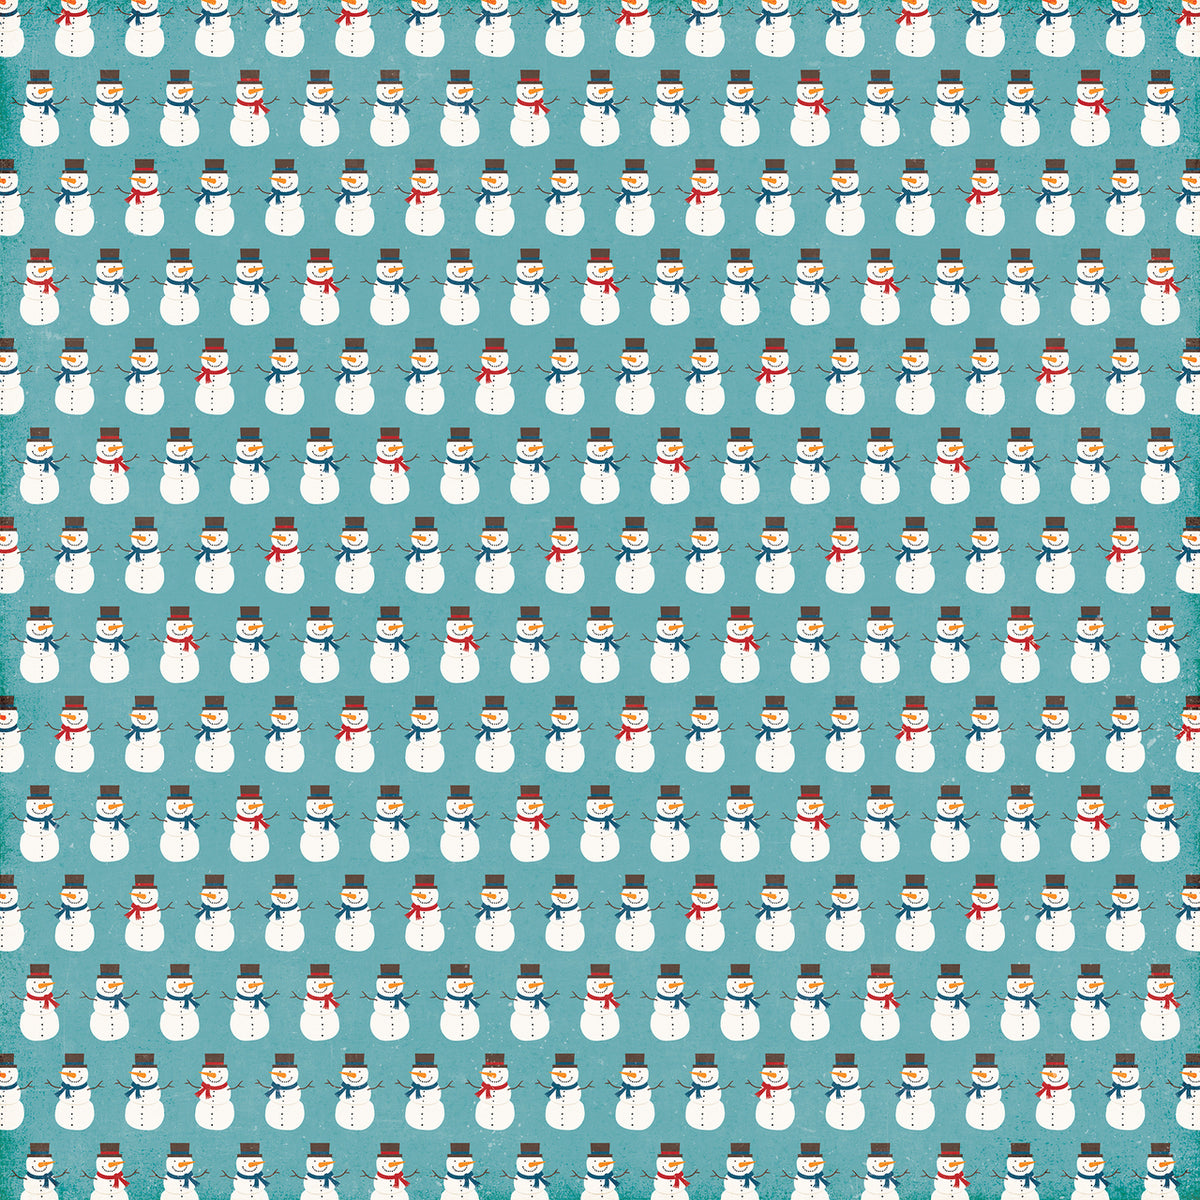 12x12 patterned paper with rows of happy snowmen on ice-blue background - Echo Park Paper